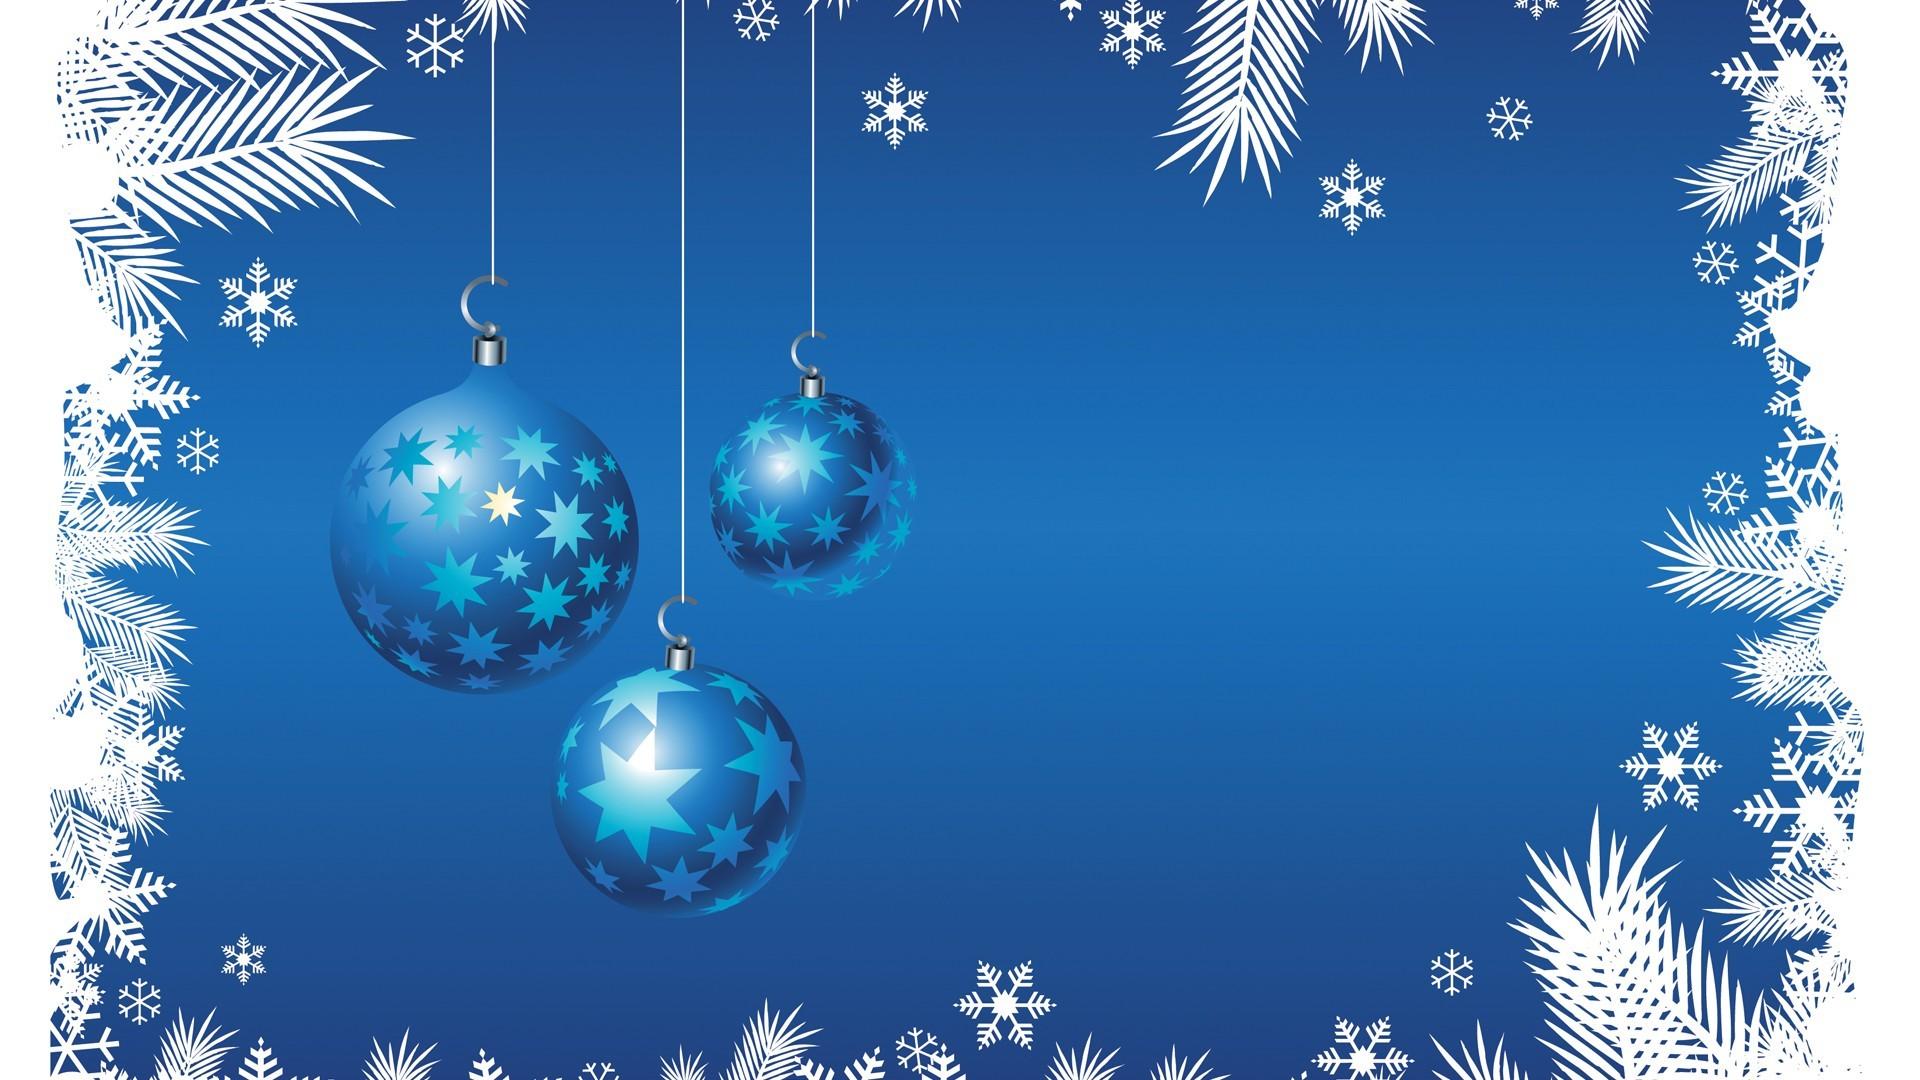 Blue illustrations christmas snowflakes background vector ...